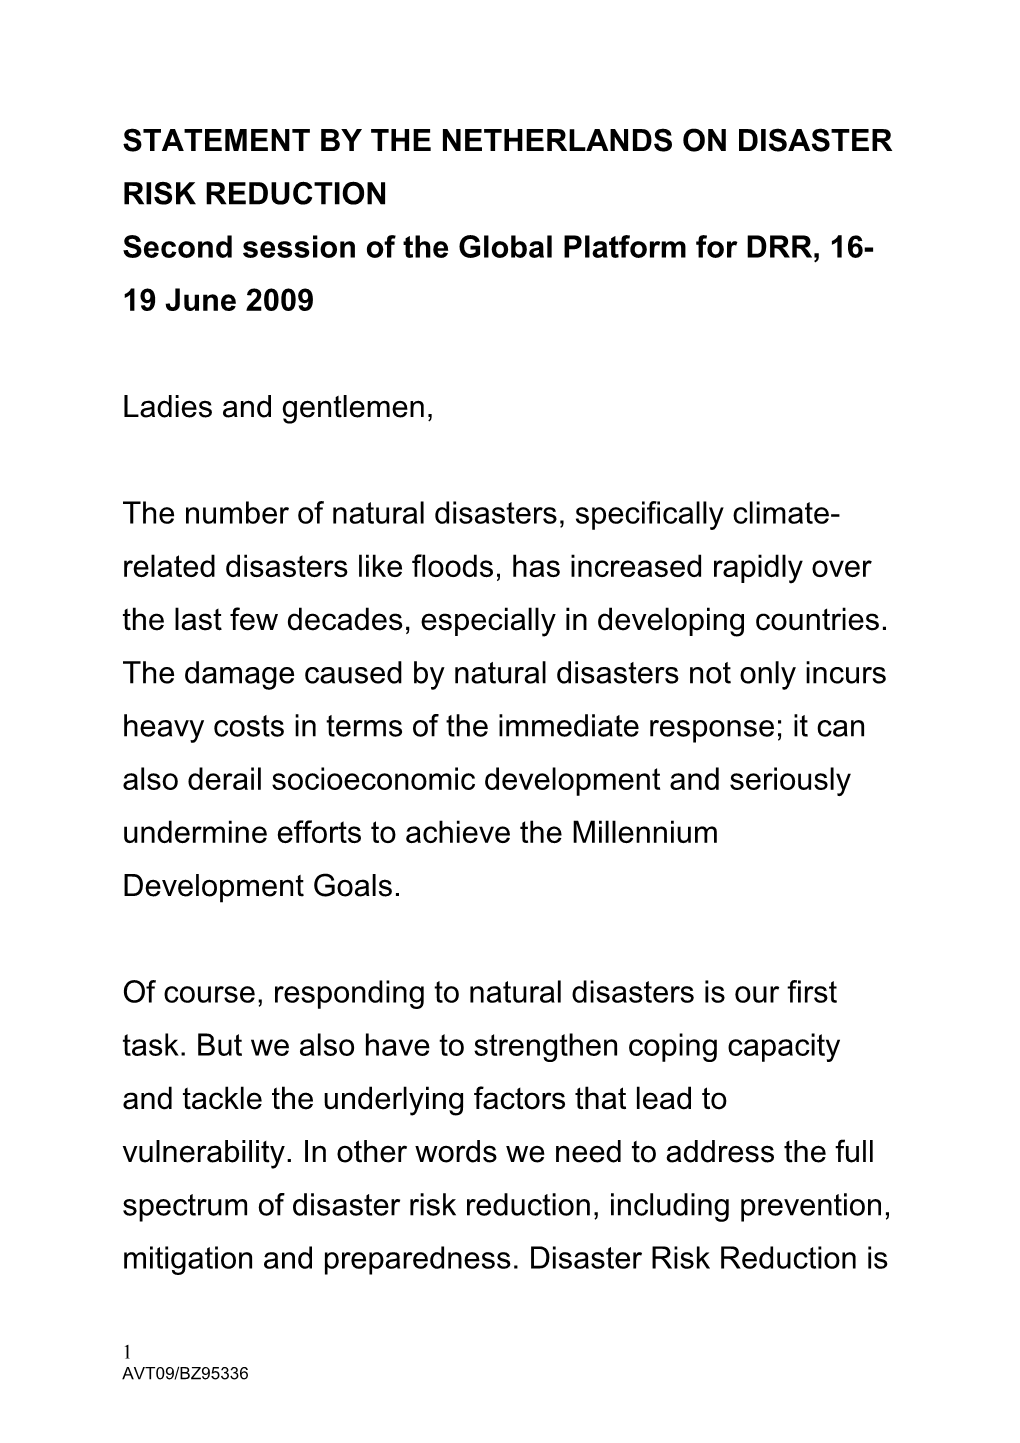 Statement by the Netherlands on Disaster Risk Reduction